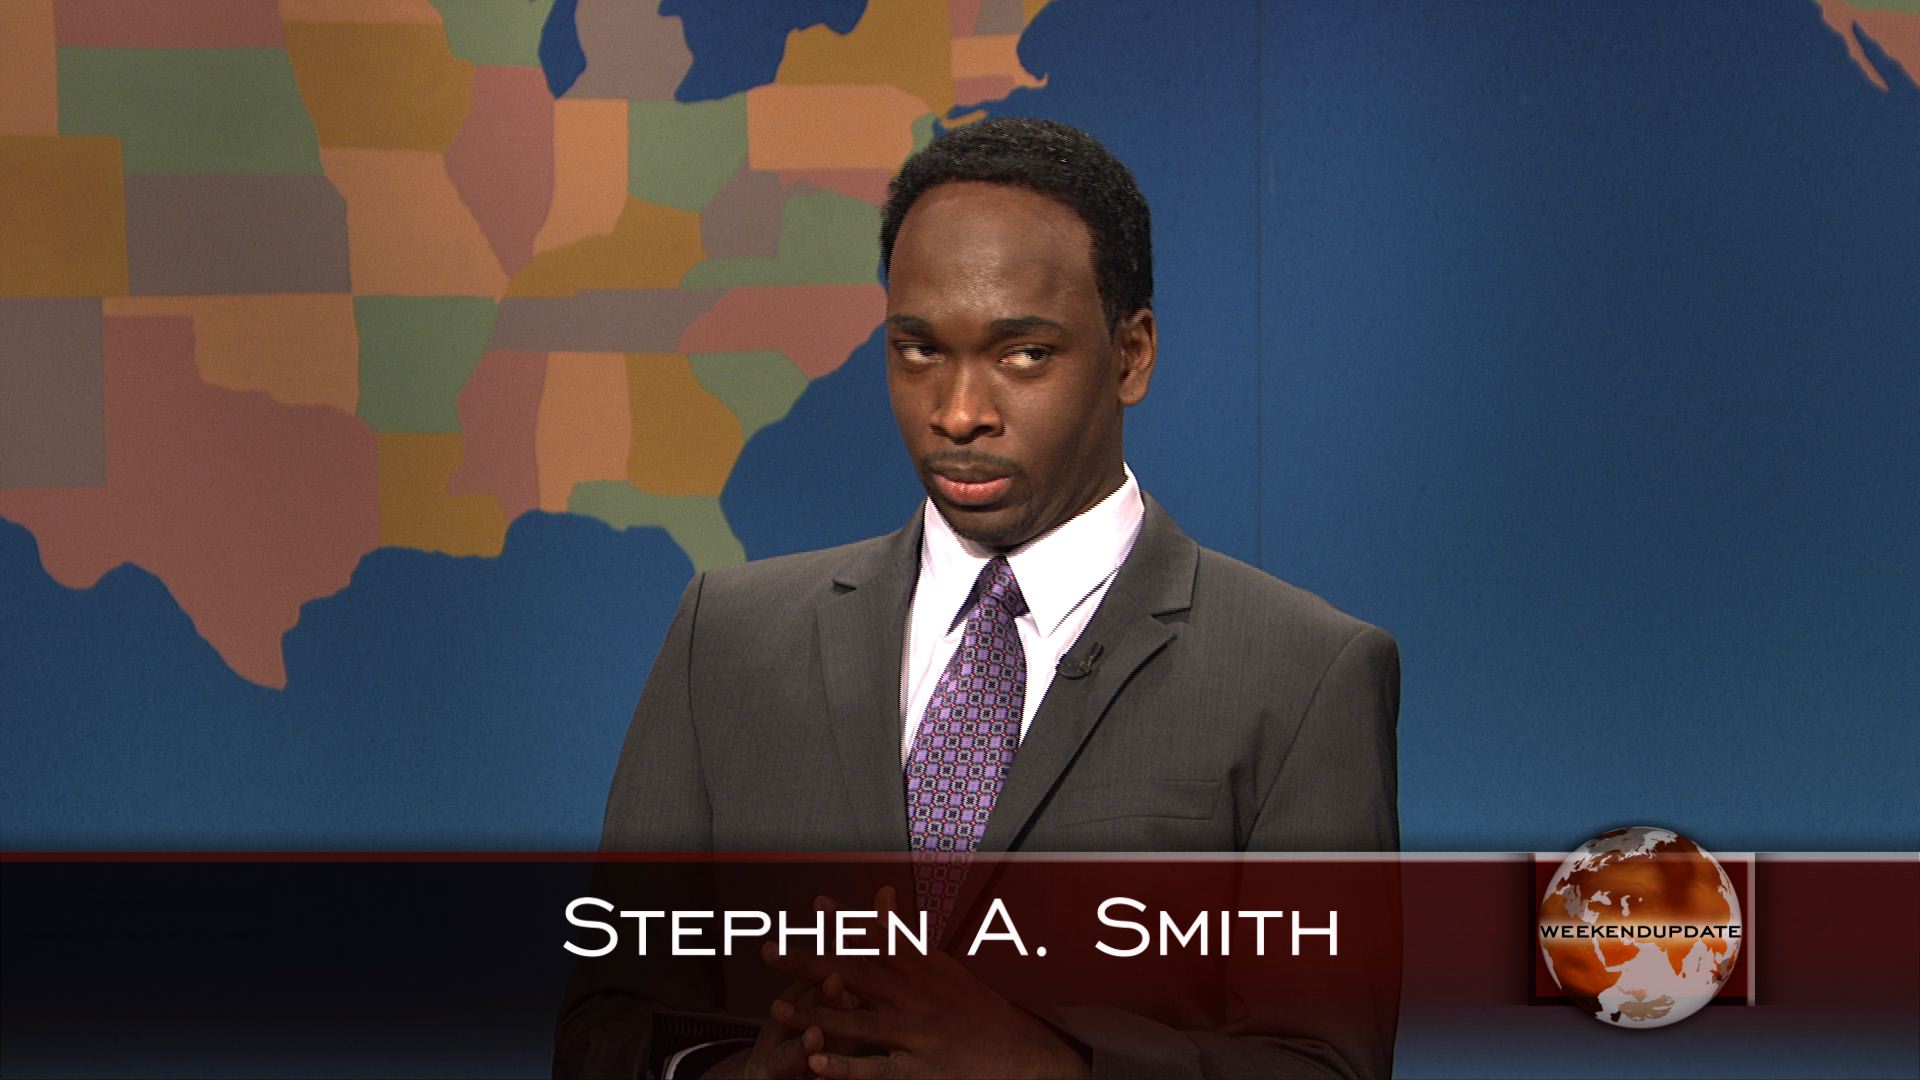 Watch Weekend Update: Stephen A. Smith on Tim Tebow From Saturday Night Live - NBC.com1920 x 1080